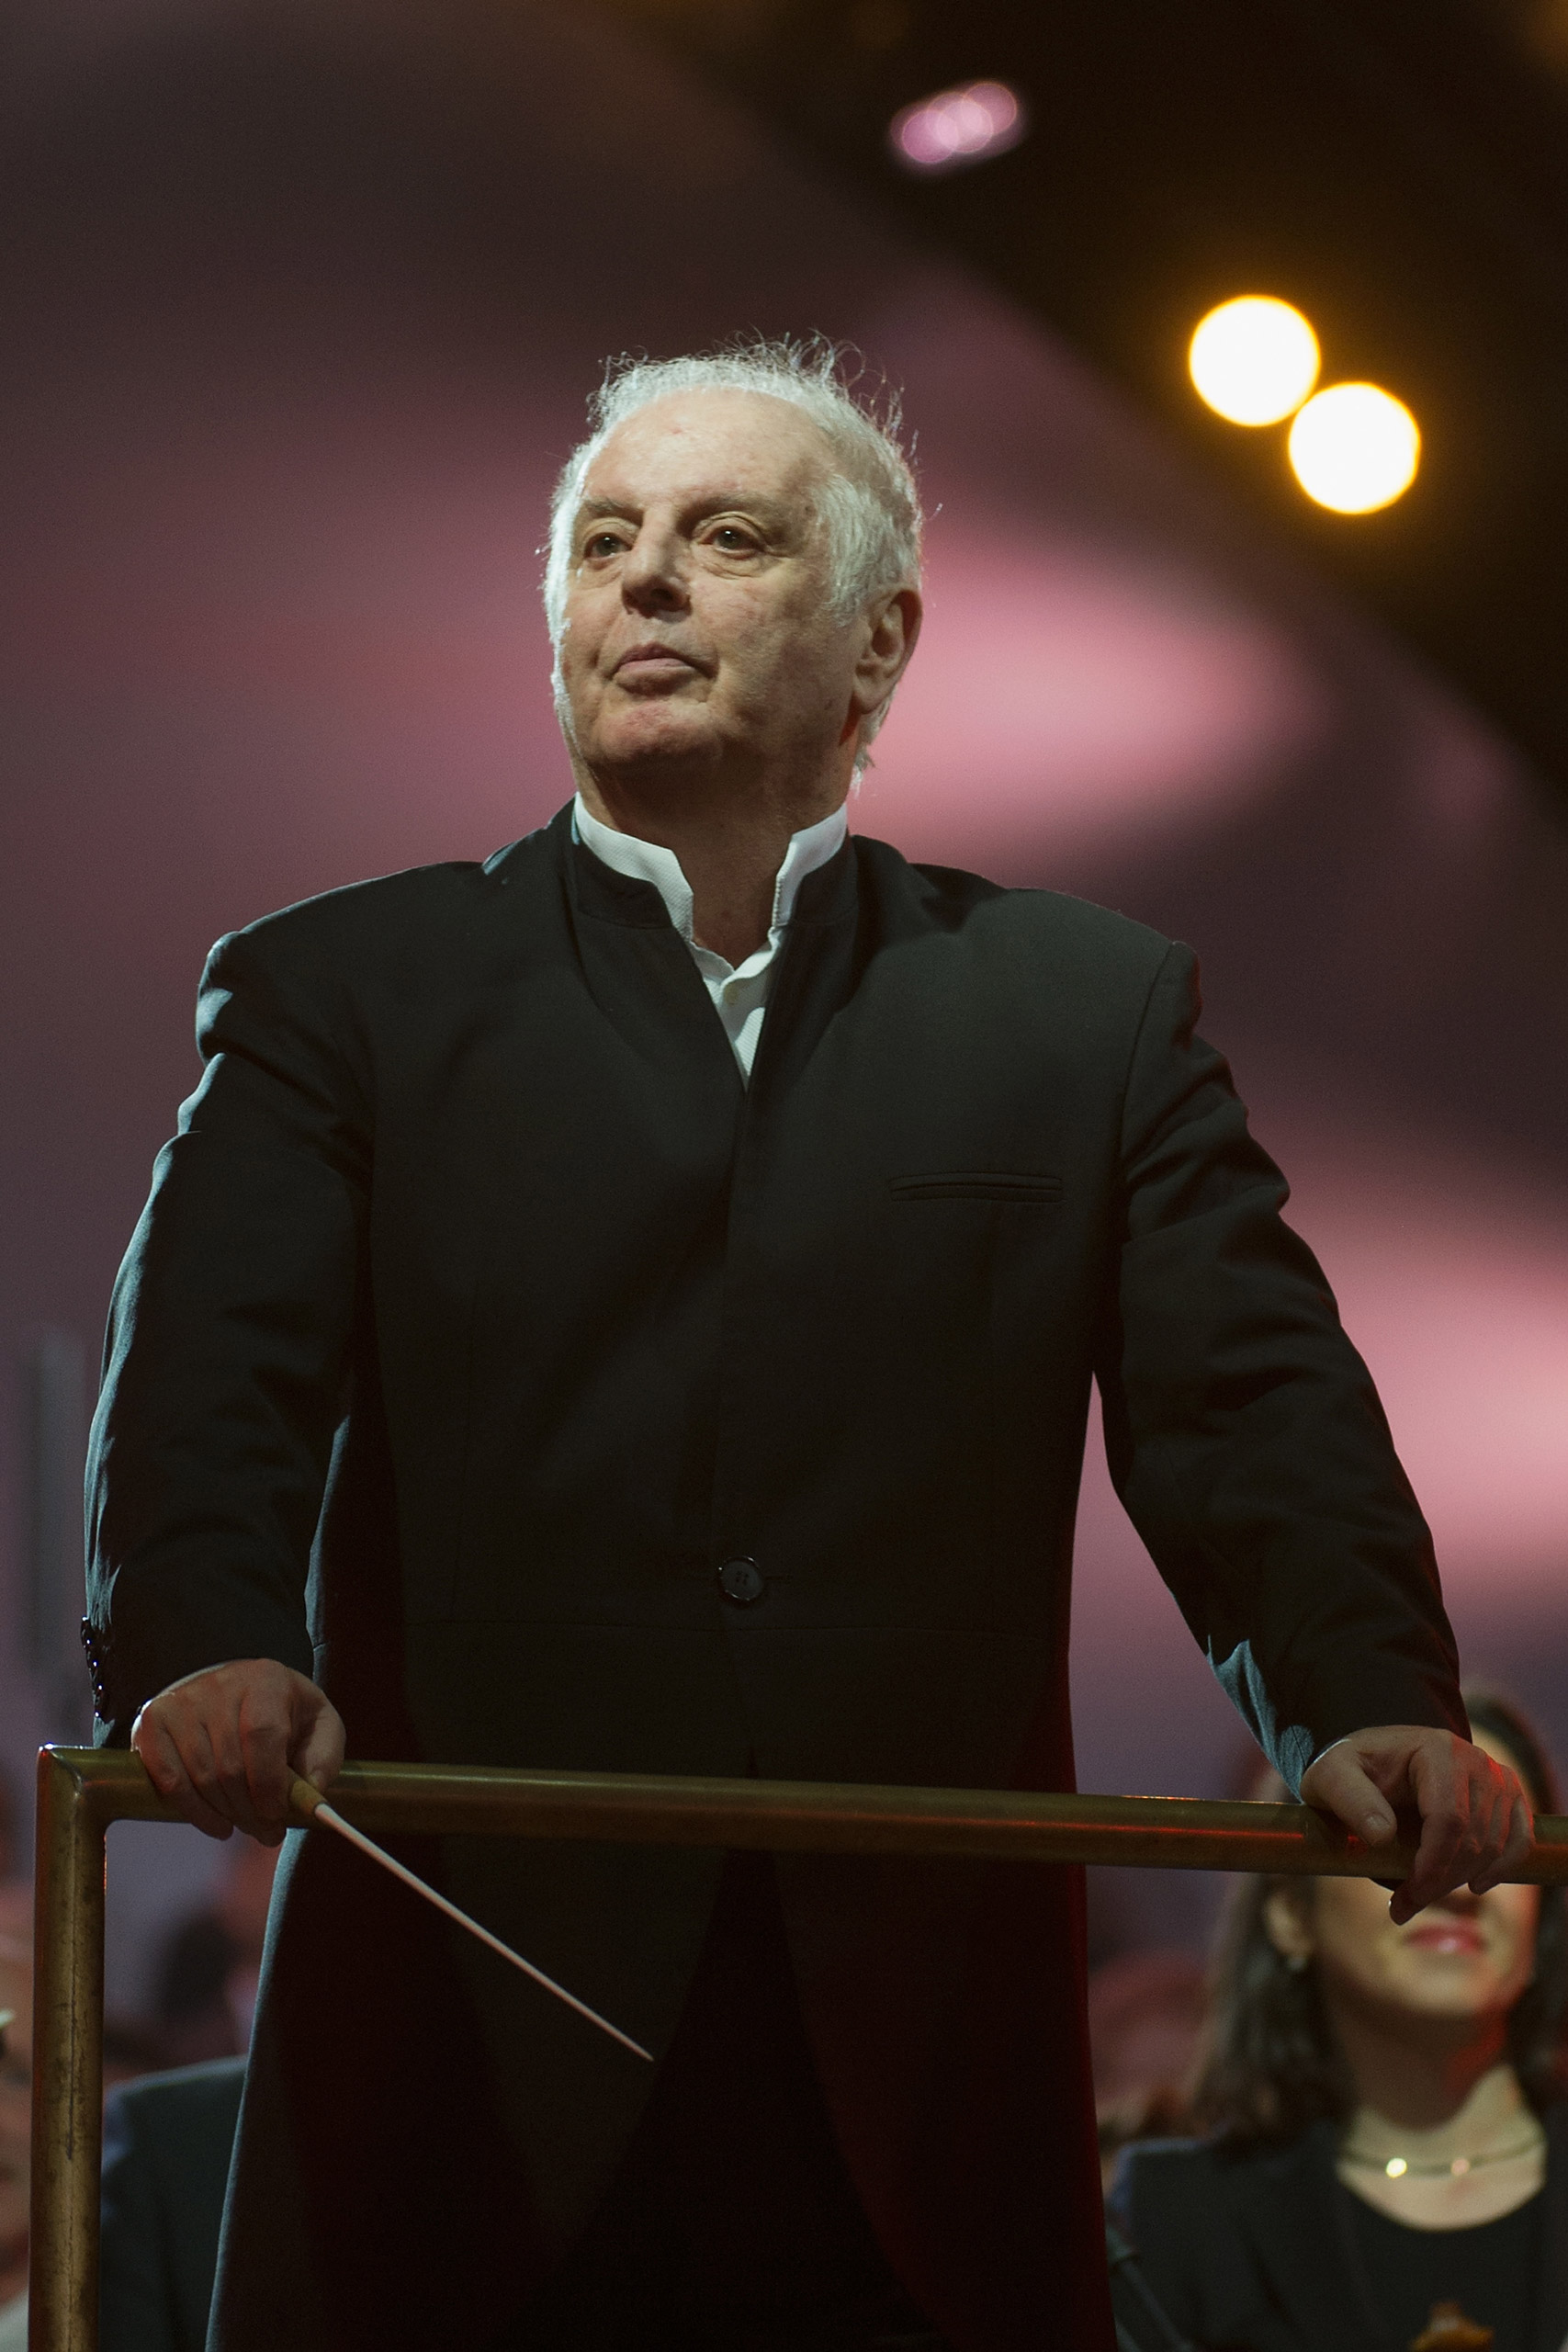 BERLIN, GERMANY - NOVEMBER 09: Conductor Daniel Barenboim performs at Brandenburg Gate during celebrations on the 25th anniversary of the fall of Wall on November 9, 2014 in Berlin, Germany. The city of Berlin is is commemorating the 25th anniversary of the fall of the Berlin Wall with an installation of 6,800 lamps coupled with illuminated balloons along a 15km route where the Wall once ran and divided the city into capitalist West and communist East. The fall of the Wall on November the 9, 1989 was among the most powerful symbols of the revolutions that swept through the communist countries of Eastern Europe and heralded the end of the Cold War. Built by the communist authorities of East Germany in 1961, the Wall prevented East Germans from fleeing west and was equipped with guard towers and deadly traps. (Photo by Target Presse Agentur Gmbh/Getty Images)